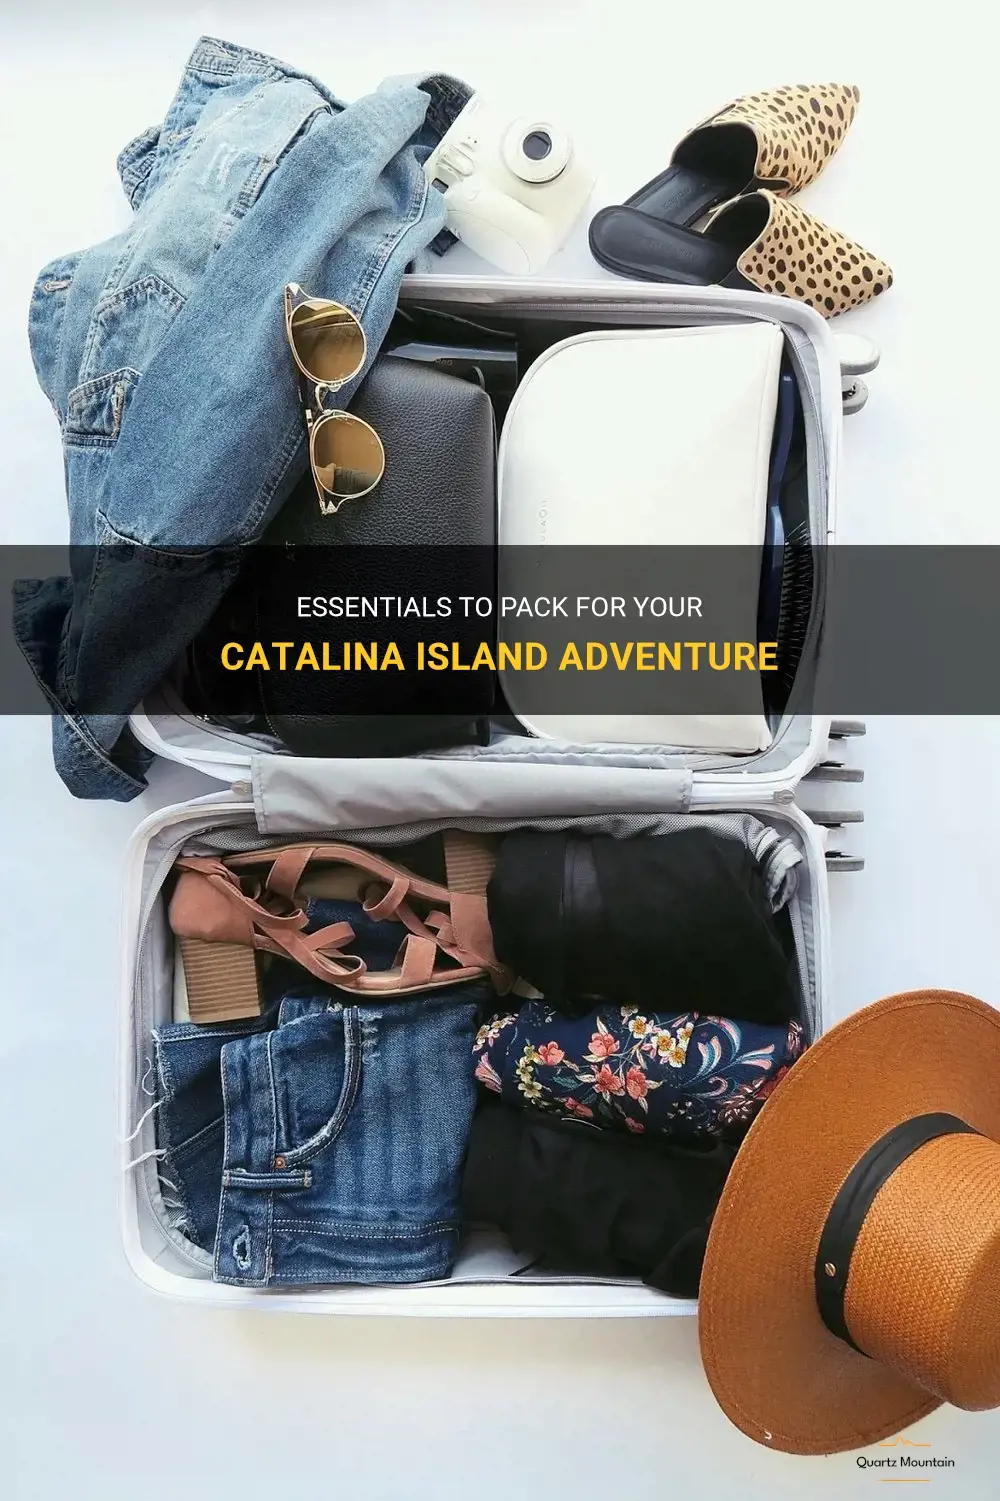 what to pack for catalina island